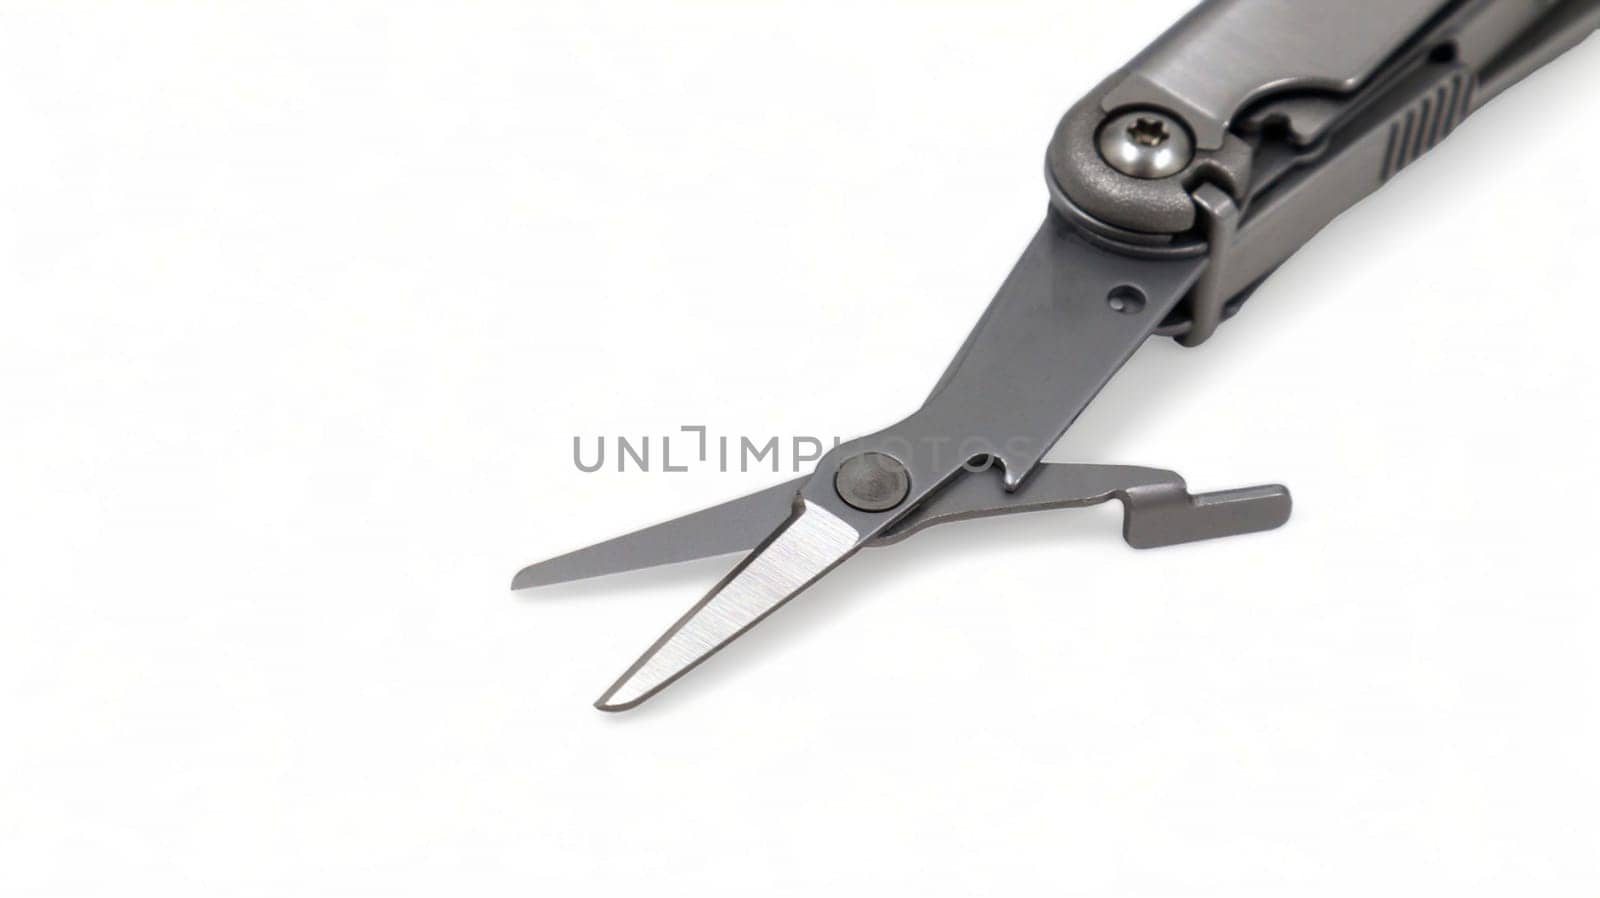 The scissors tool is pulled out of the multitool. Modern steel multitool with many tools isolated on white background. Compact and portable product. Pocket knife. EDC concept. Copy space